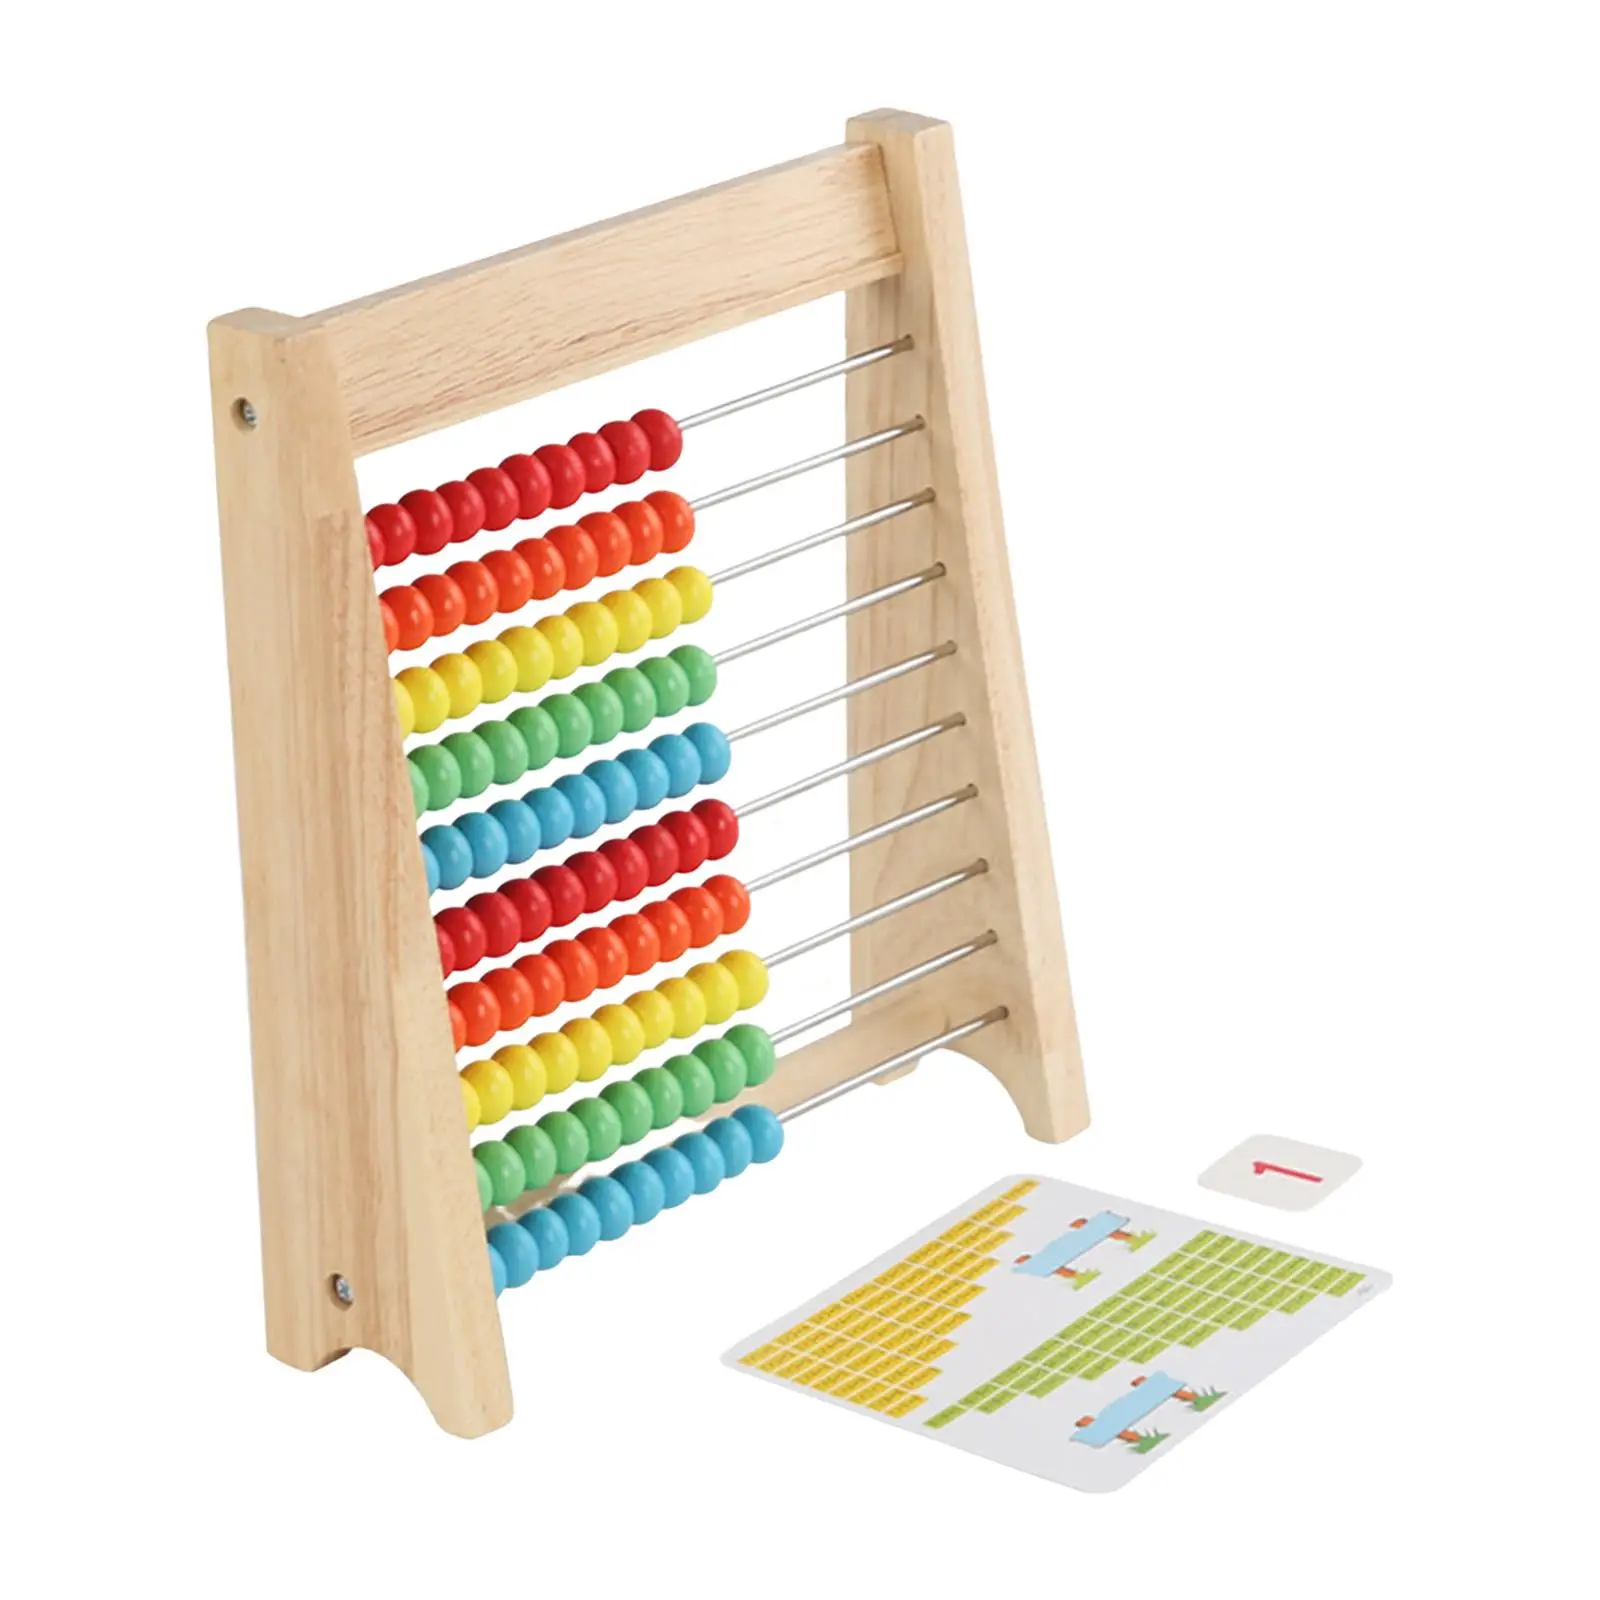 Wooden Abacus Toy Early Childhood Education Educational Counting Toy for Kids Children Toddlers Kindergarten Boys Girls